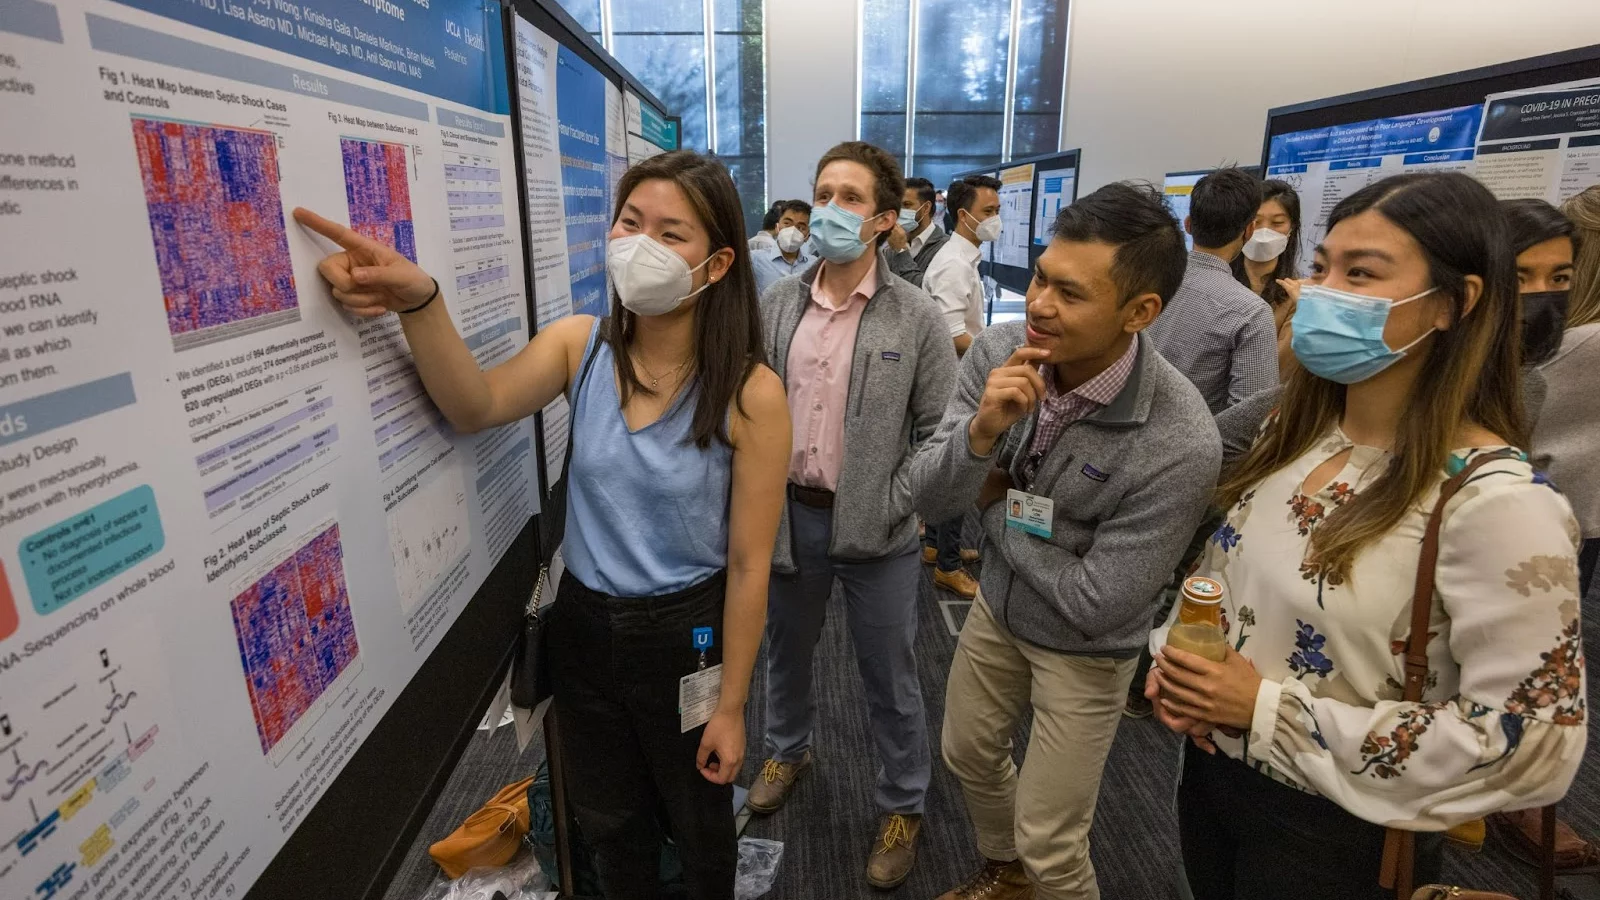 Medical school students at a research poster presentation